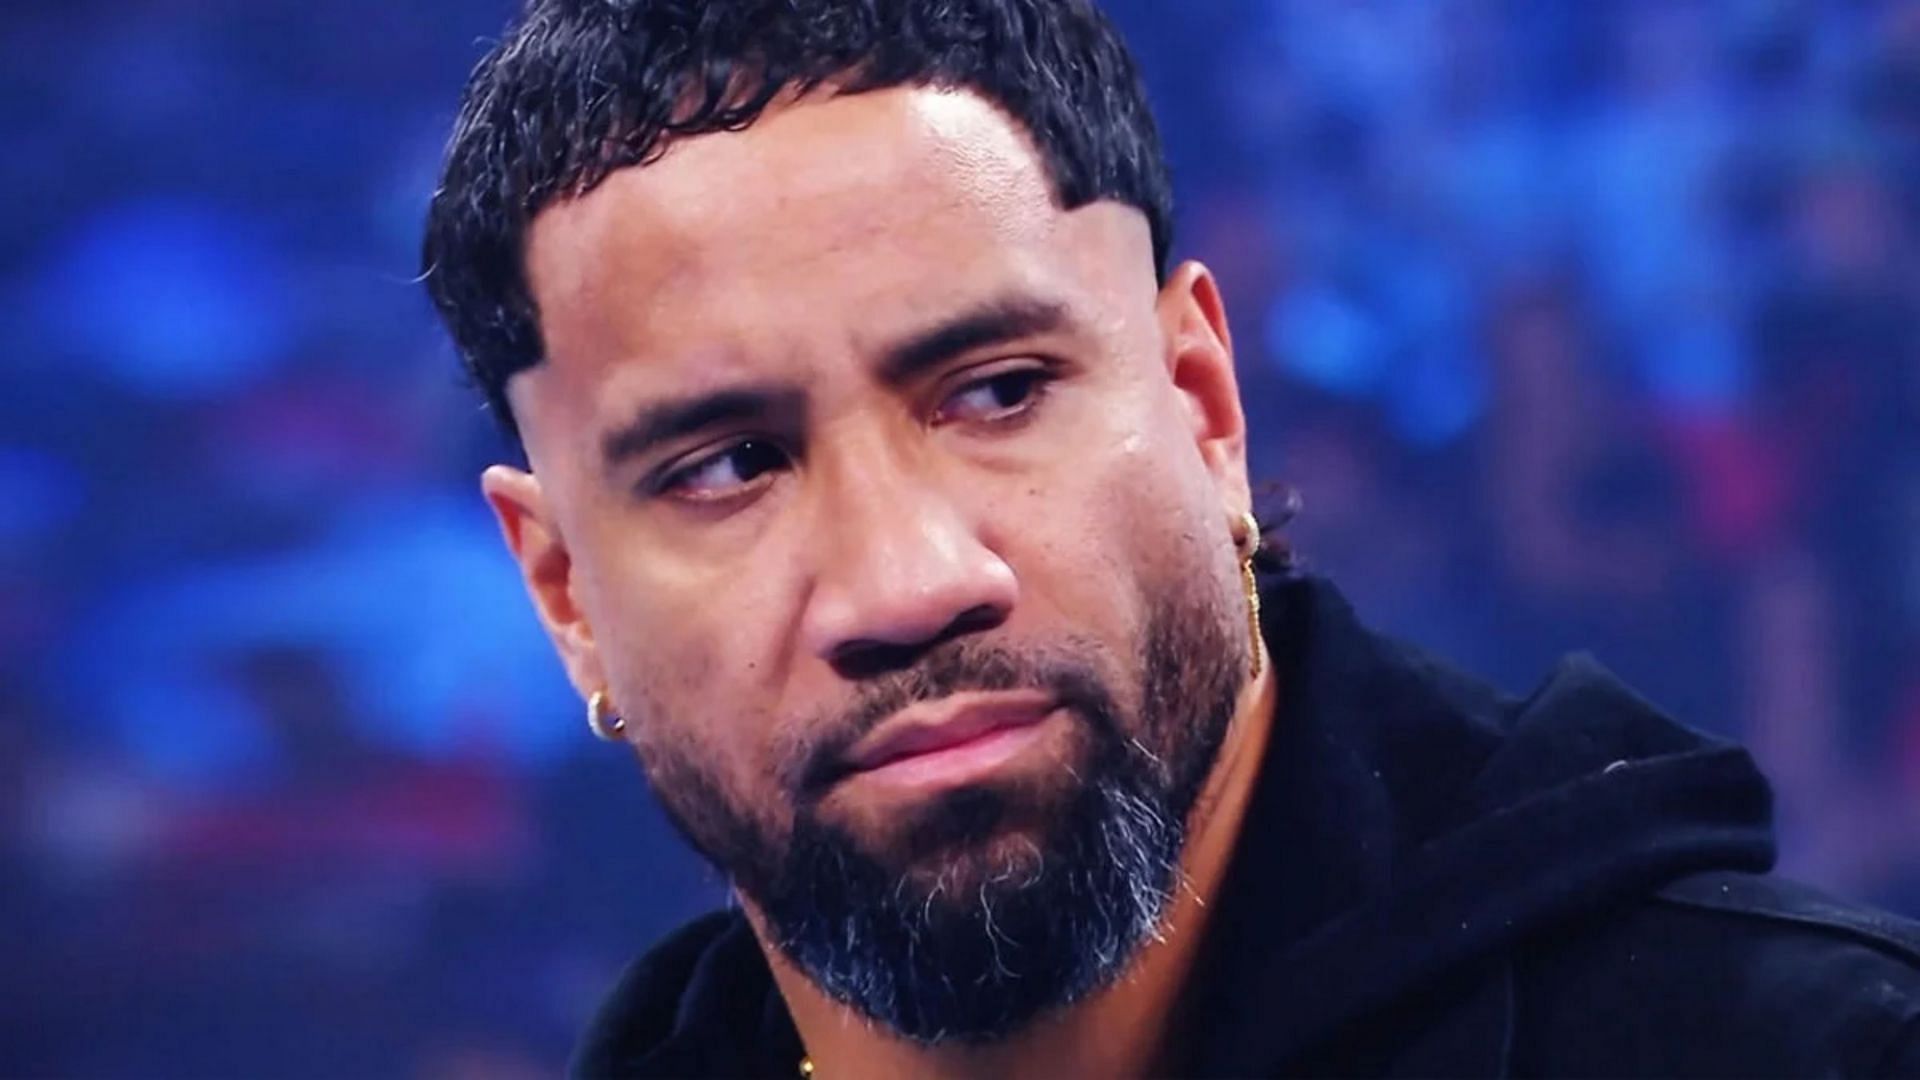 Jey Uso recently moved from SmackDown to WWE RAW